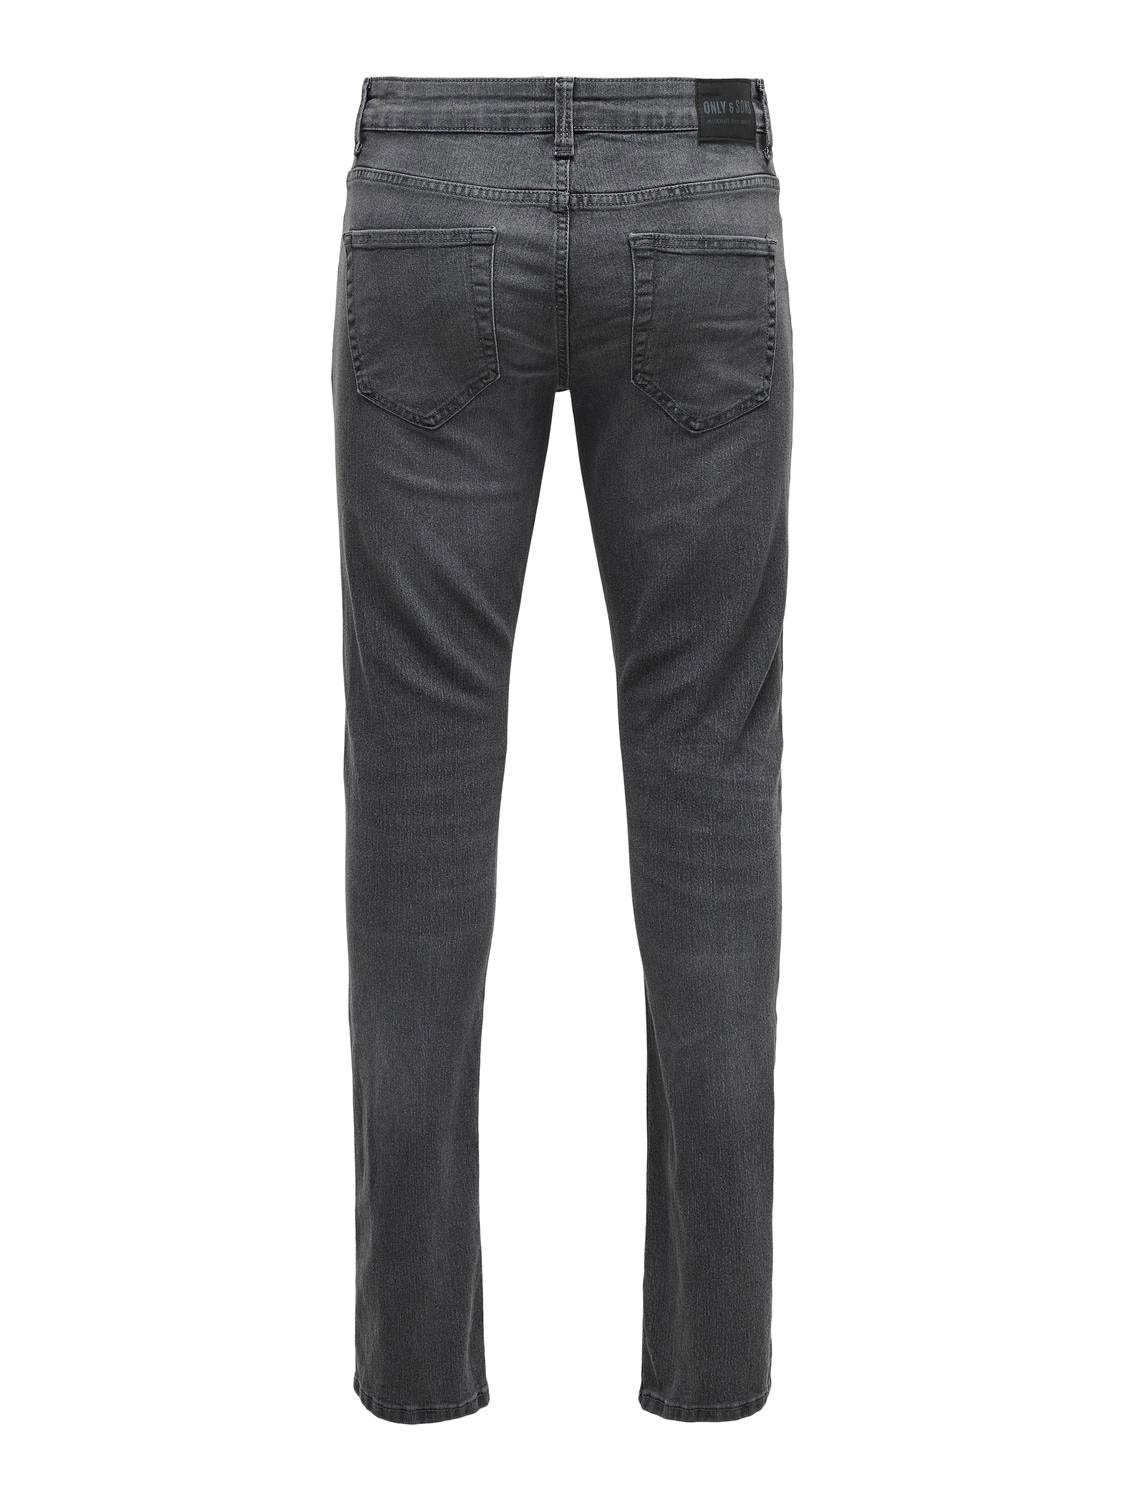 ONLY & SONS Slim Fit Mid rise Jeans -Grey Denim - 22027842